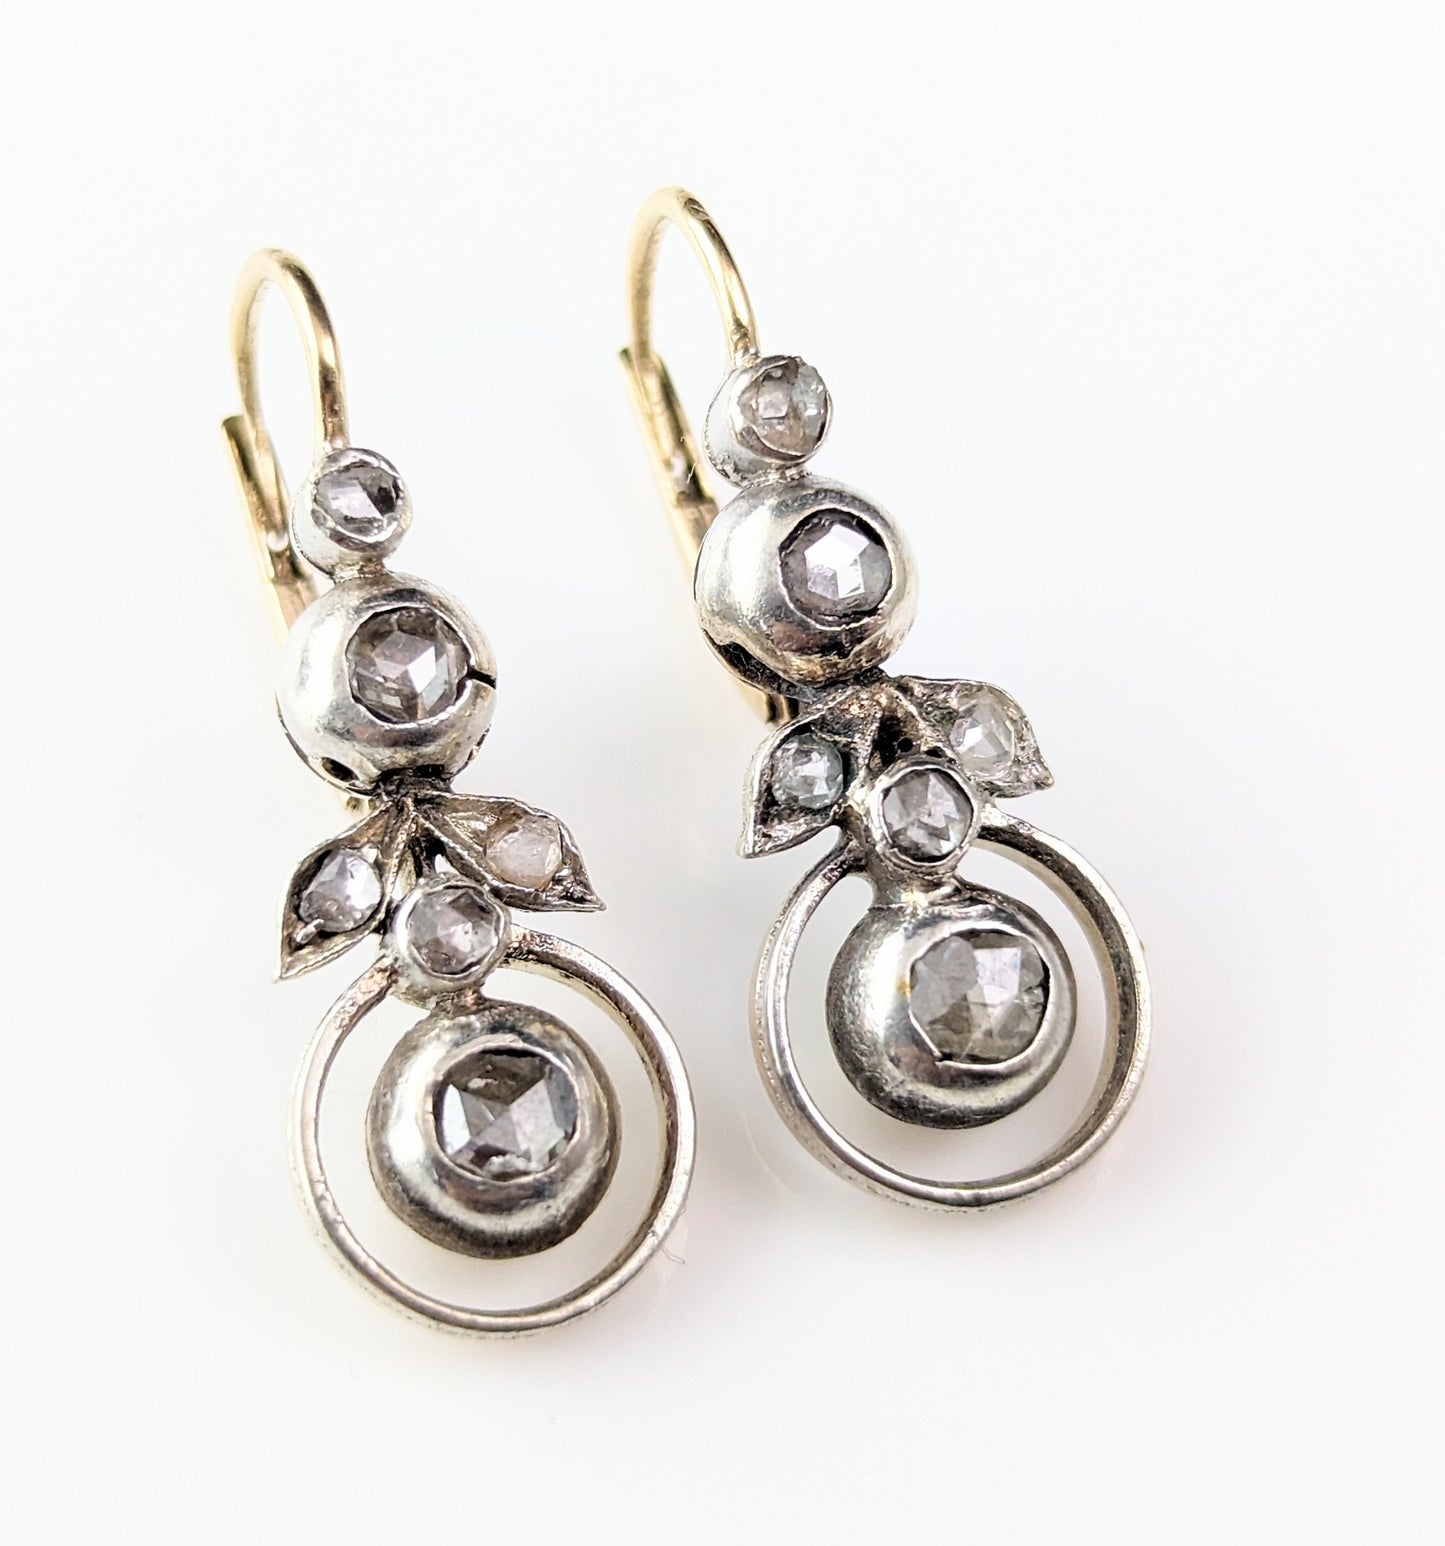 Antique Diamond flower earrings, 9ct gold and silver